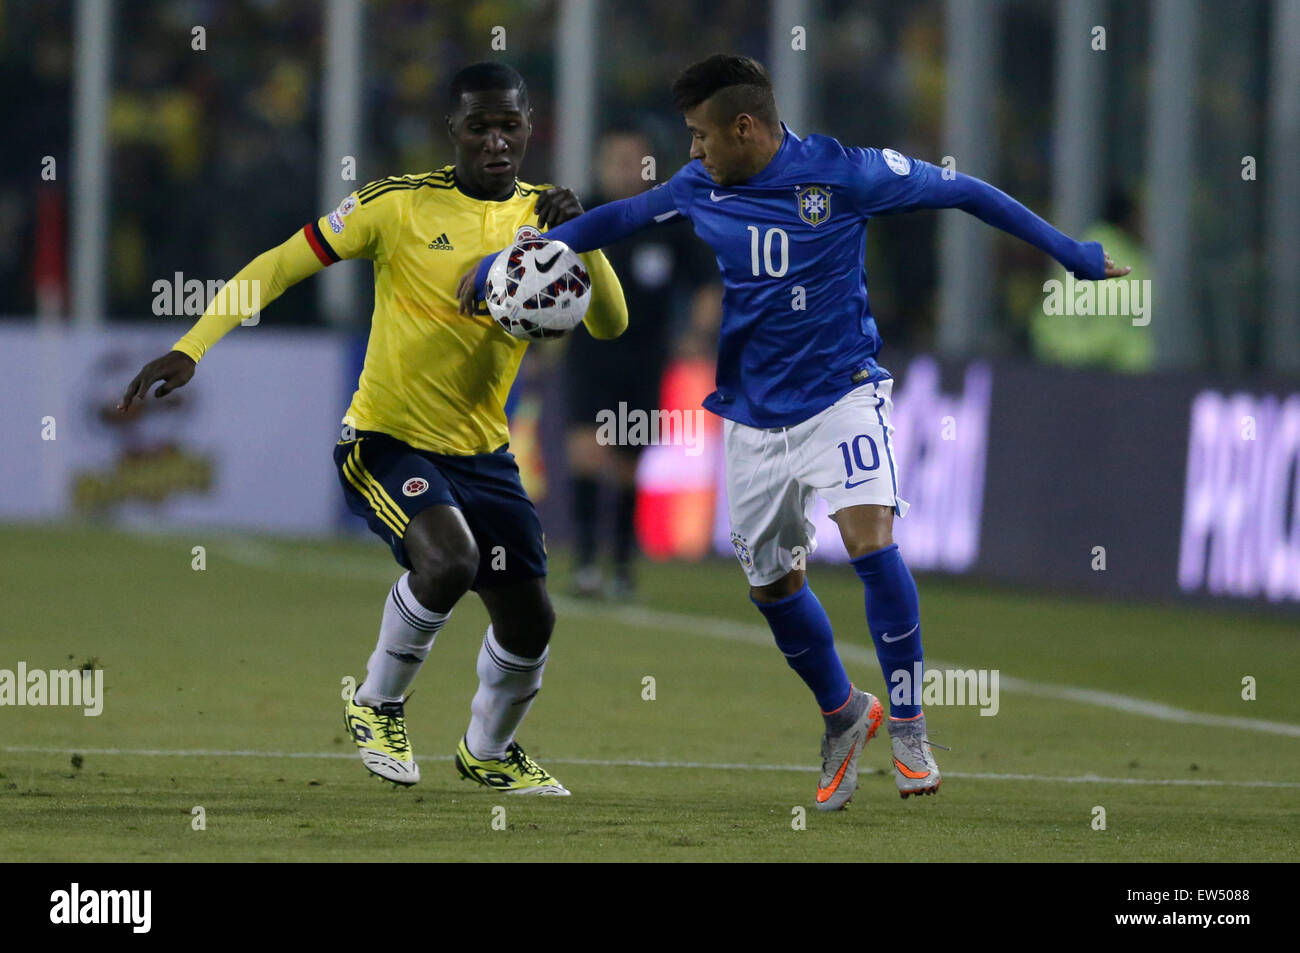 Santiago, Chile. 17th June, 2015. Neymar (R) of Brazil vies for the ball with Cristian Zapata of Colombia during the Group C match of the Copa America Chile 2015, at the Estadio Monumental, in Santiago, Chile, on June 17, 2015. Credit:  Guillermo Arias/Xinhua/Alamy Live News Stock Photo